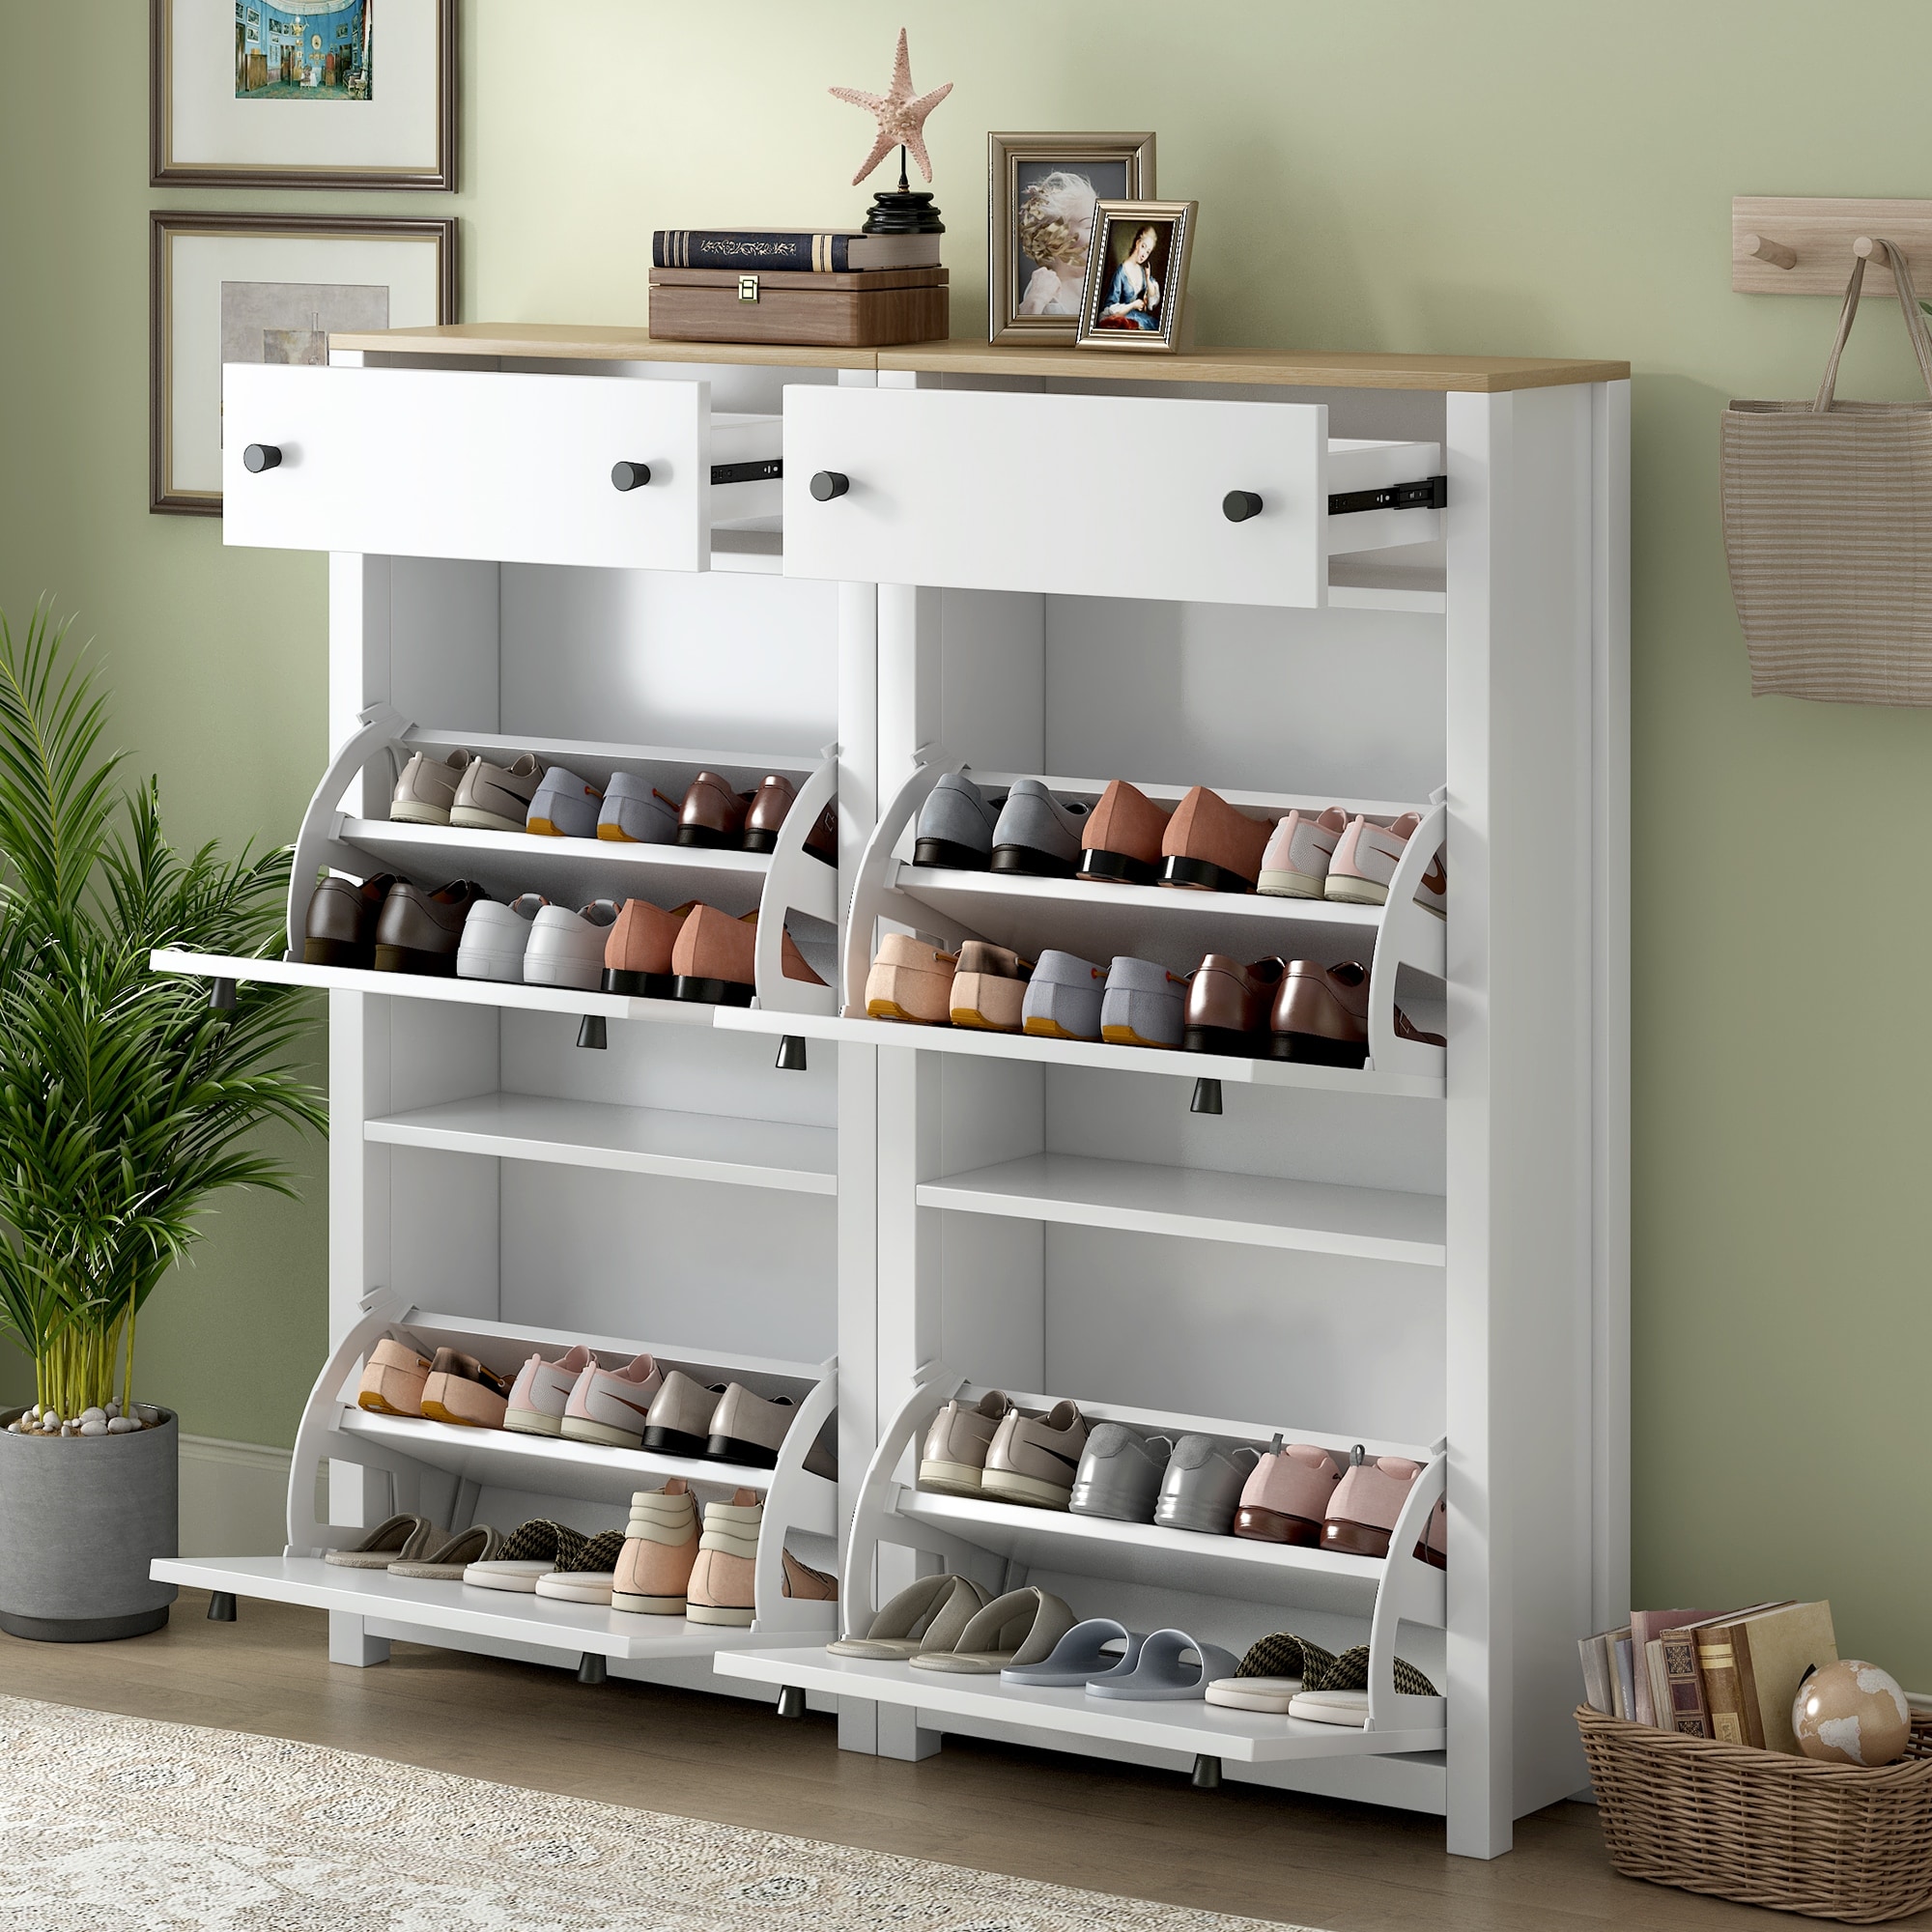 https://ak1.ostkcdn.com/images/products/is/images/direct/c166733878bf2675763c2362057679bbf84f2c37/Modern-Shoe-Cabinets-Set-of-2%2C-Shoe-Organizer-with-4-Flip-Drawers-and-Wood-Grain-Top%2C-Shoe-Racks-with-Drawers.jpg